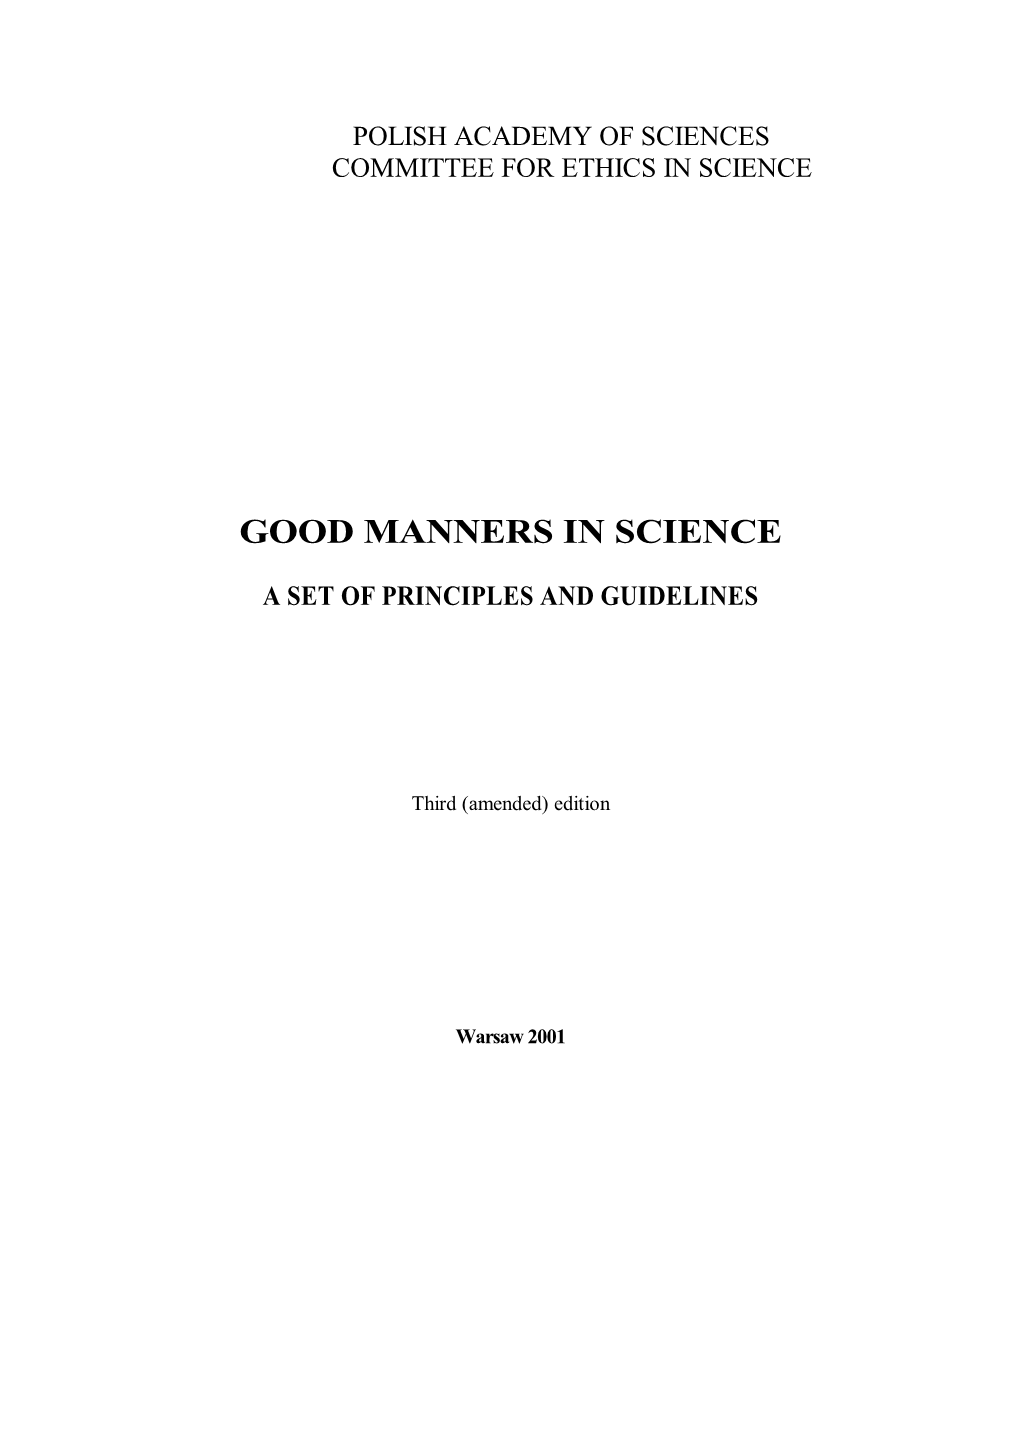 Good Manners in Science. a Set of Principles and Guidelines